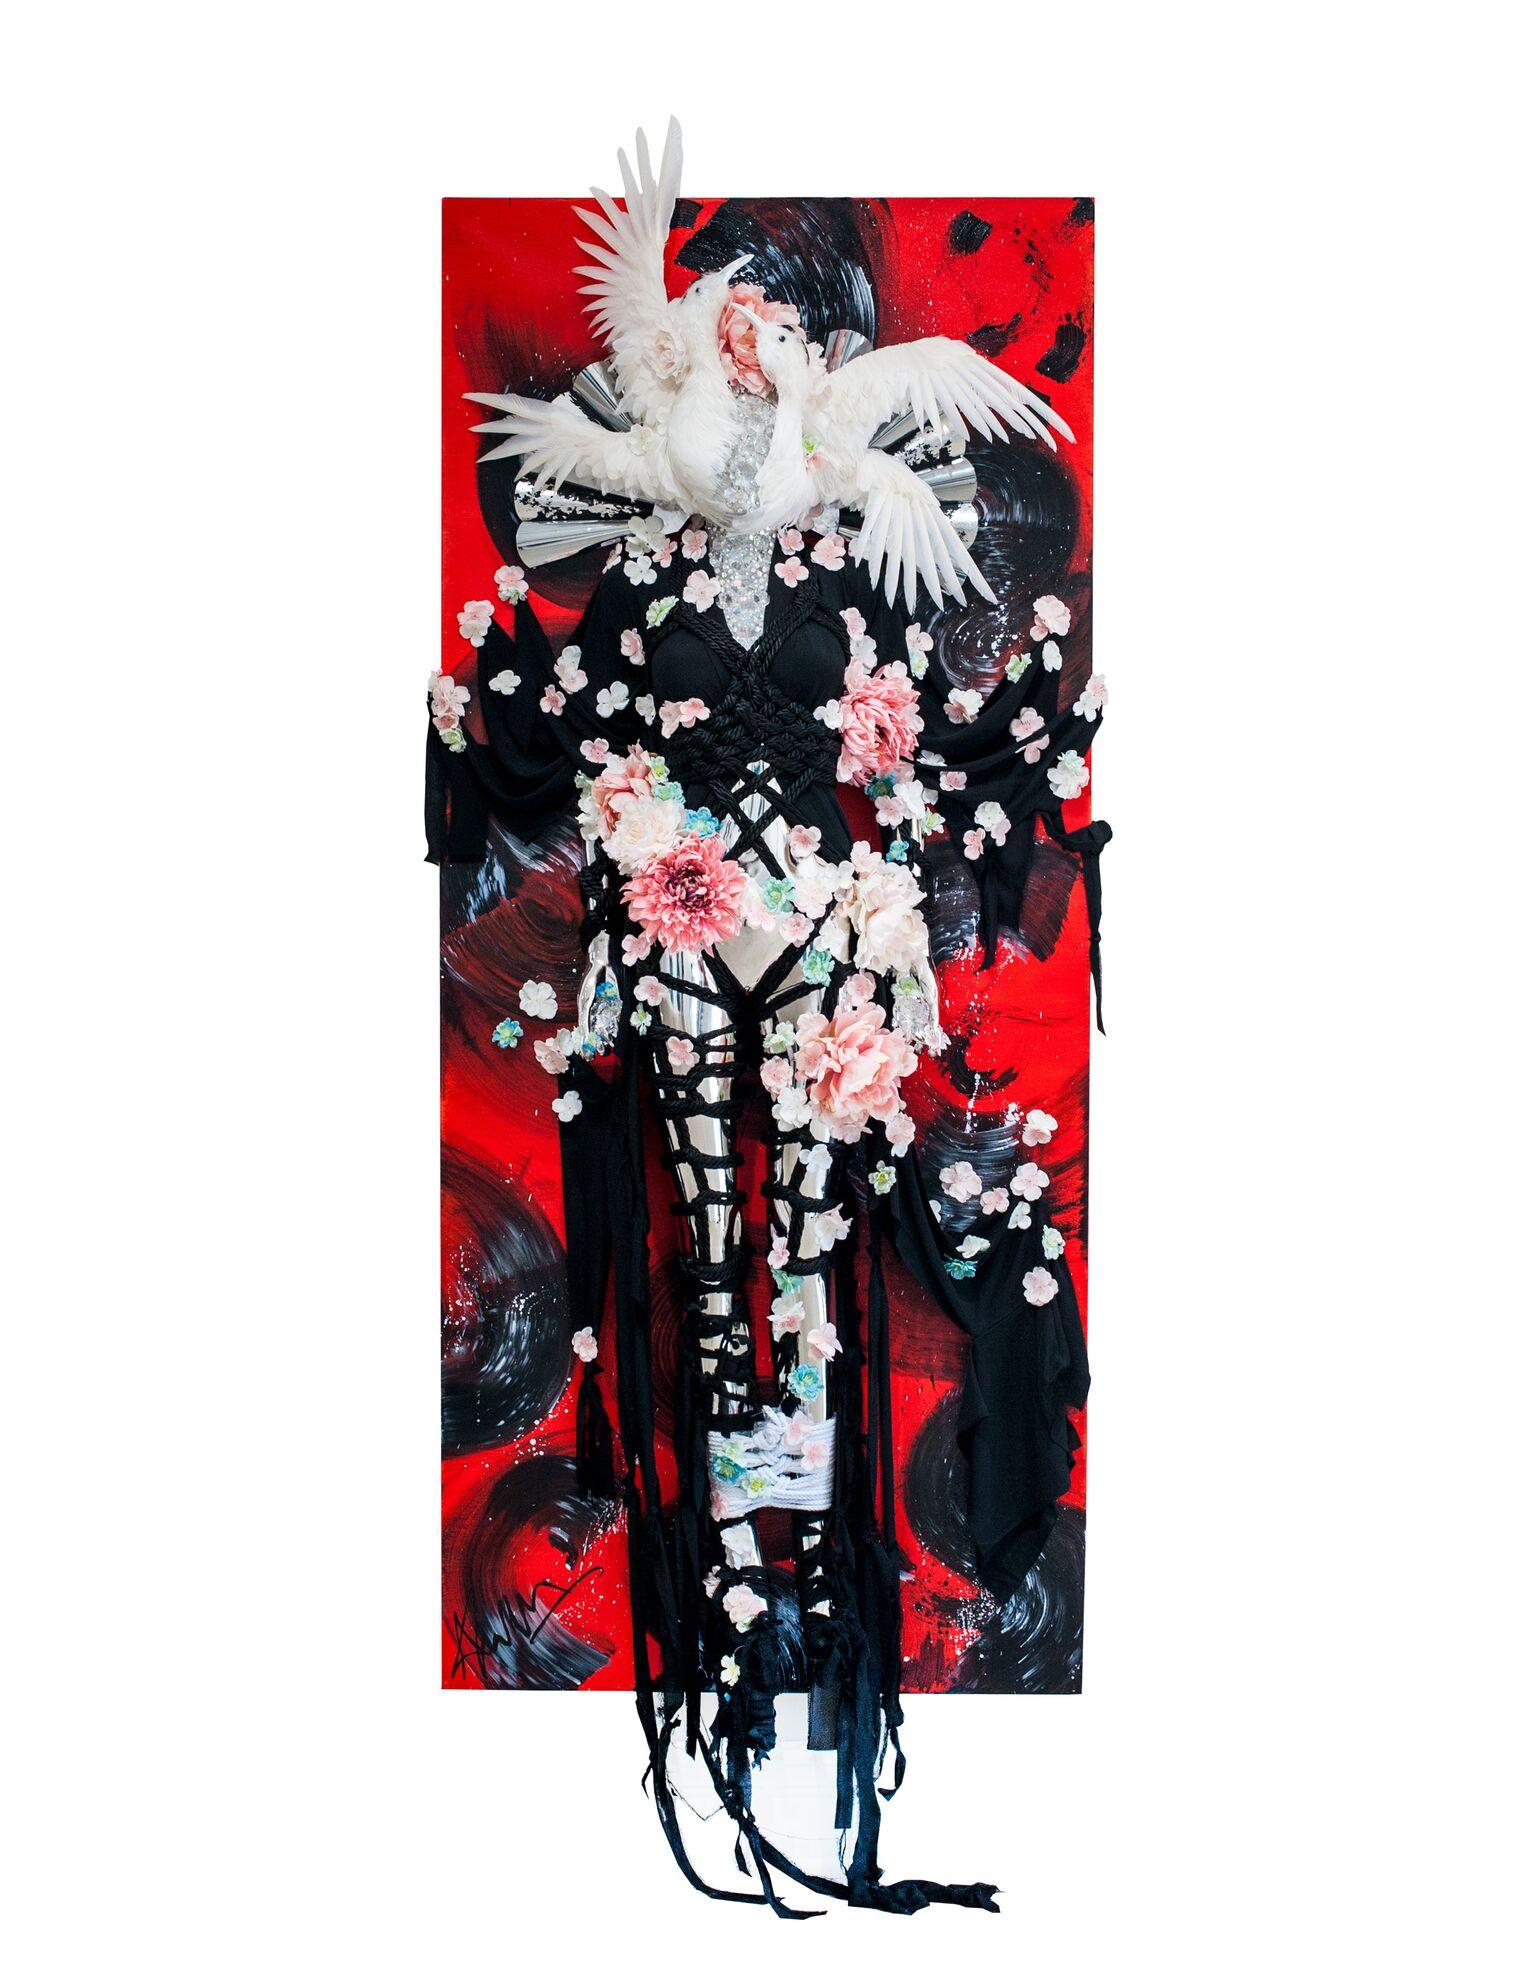 Theresa Dapra Figurative Painting - “Flight of Eternal Fortune” (air) - oriental 3D wall piece in red